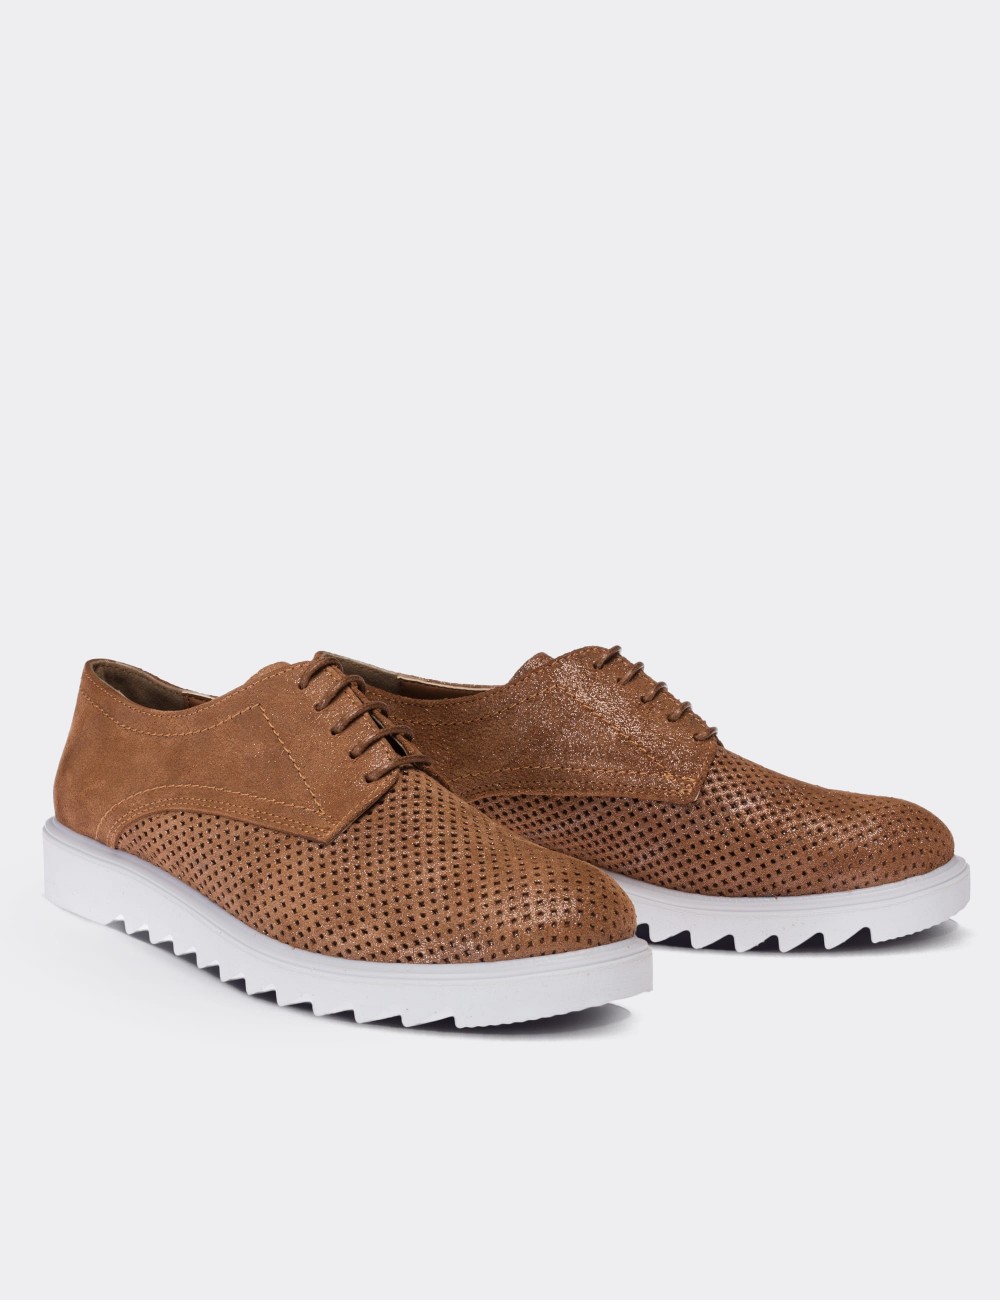 Tan  Leather Lace-up Shoes - 01430ZTBAP01